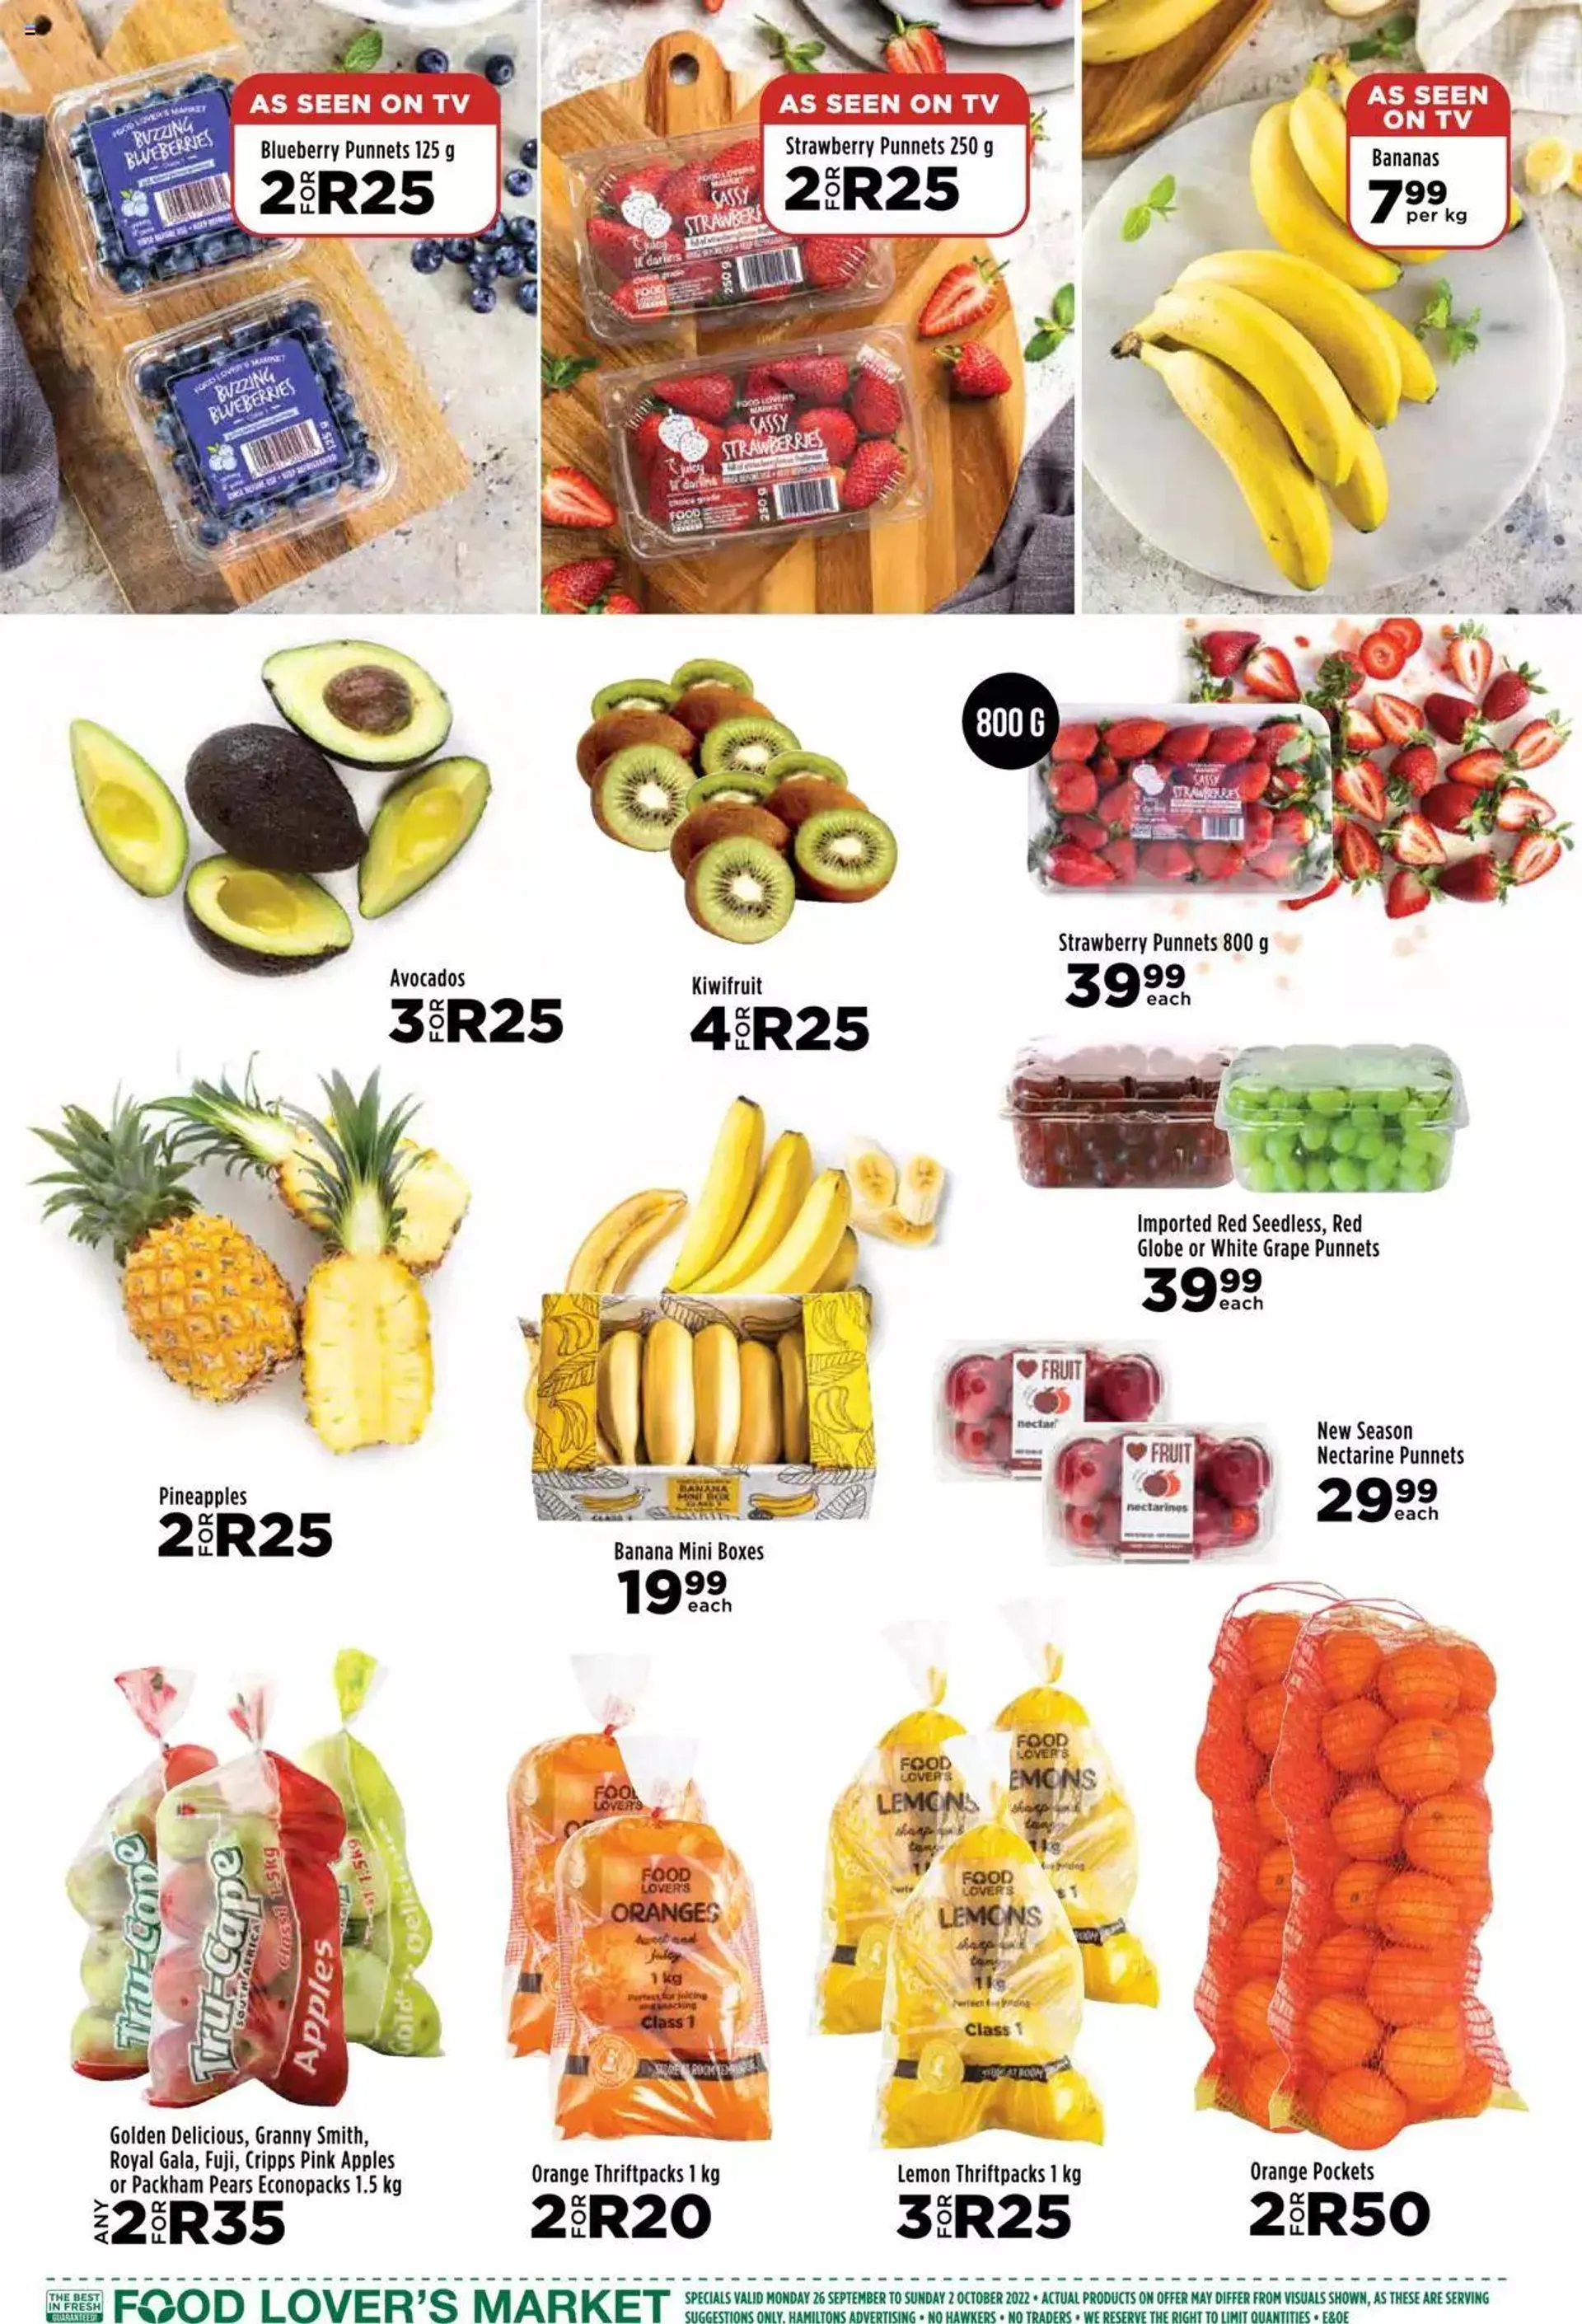 Food Lovers Market Western Cape - Weekly Specials - 2